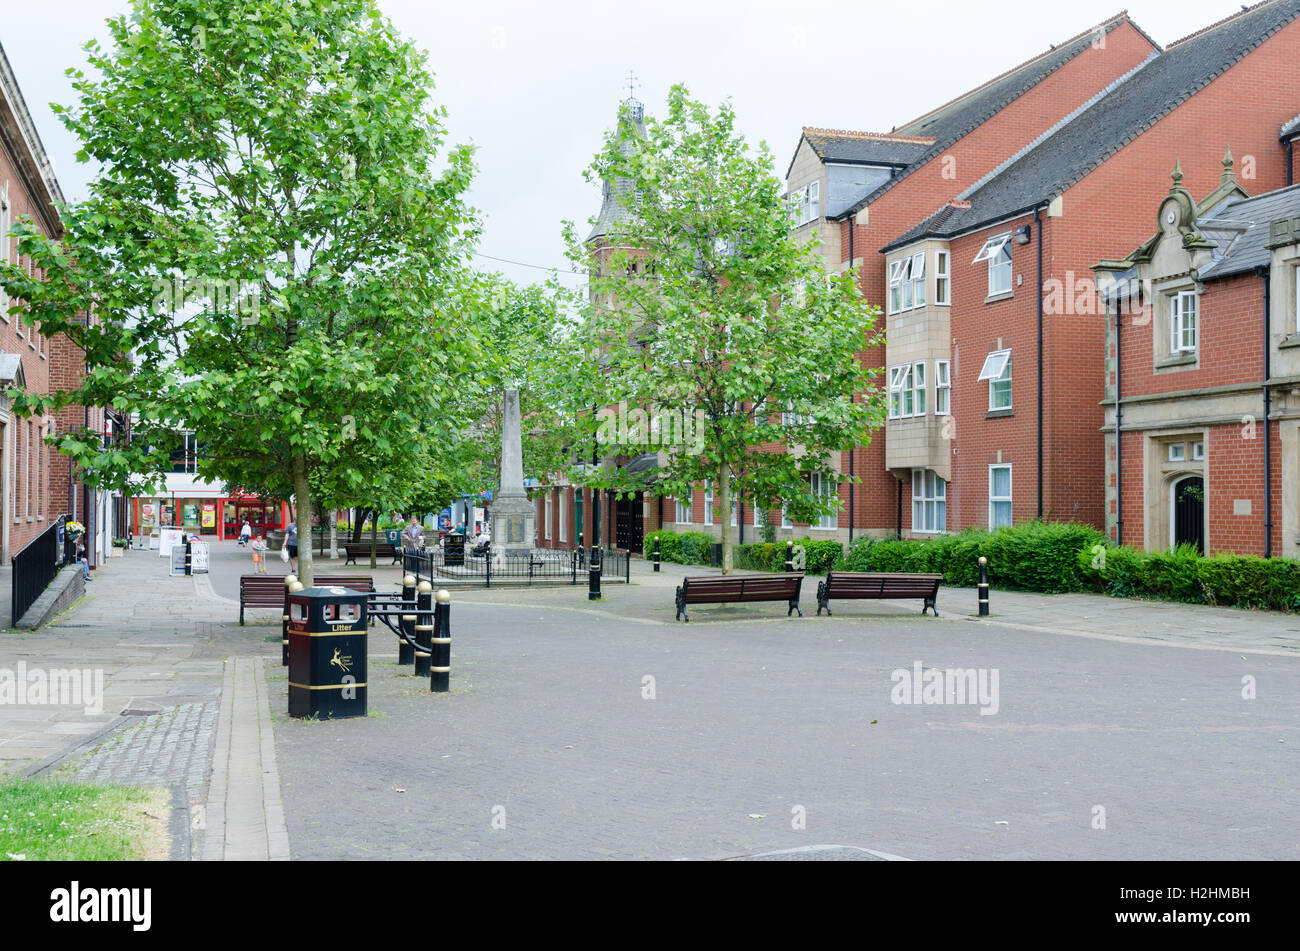 Anson Street in the Staffordshire town of Rugeley Stock Photo